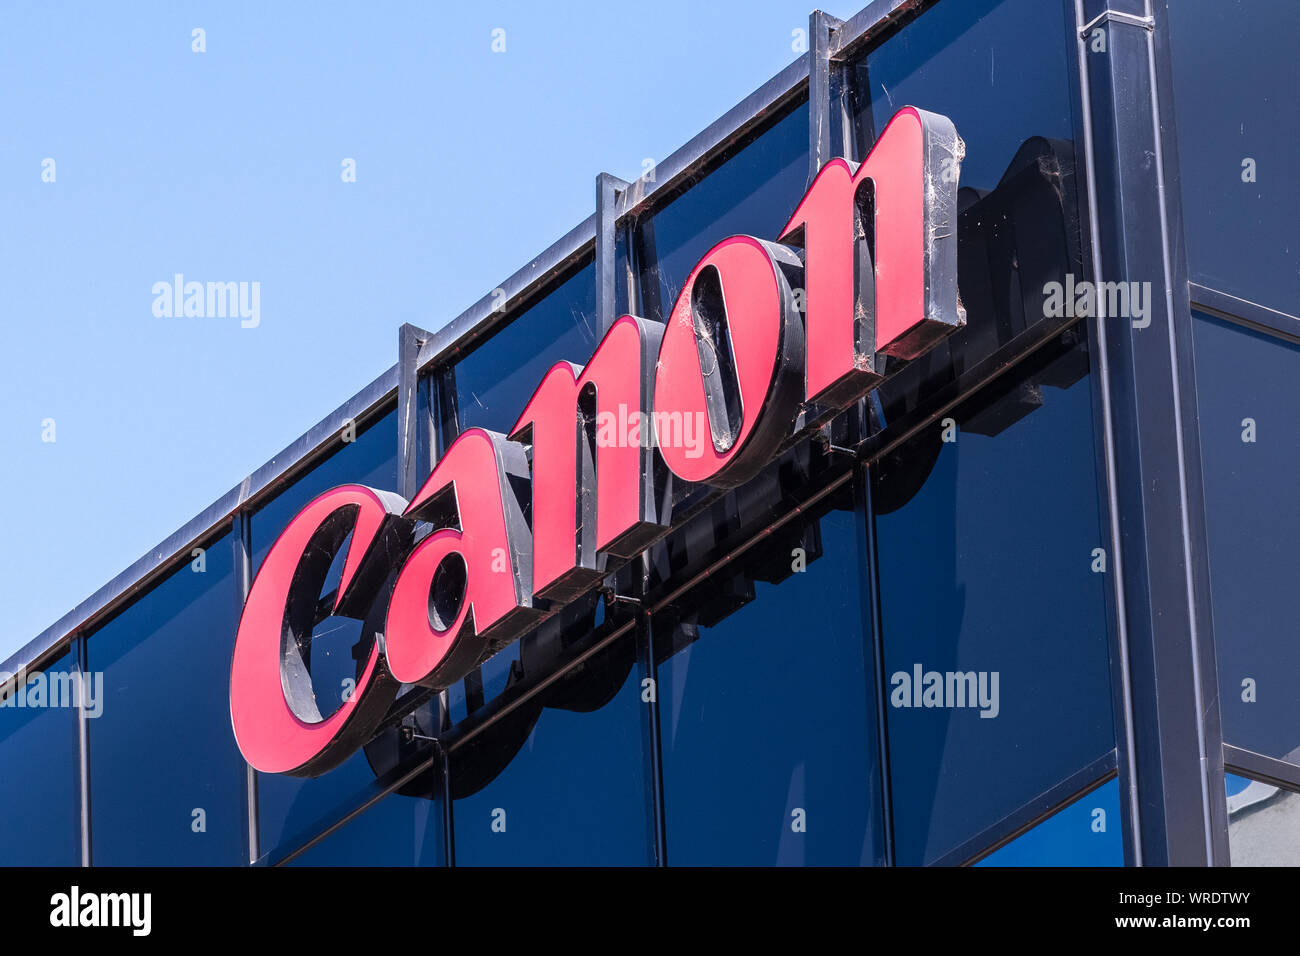 Sep 9, 2019 San Jose / CA / USA - Canon sign at the Canon Solutions America (wholly owned subsidiary of Canon USA Inc.) offices in Silicon Valley; Can Stock Photo